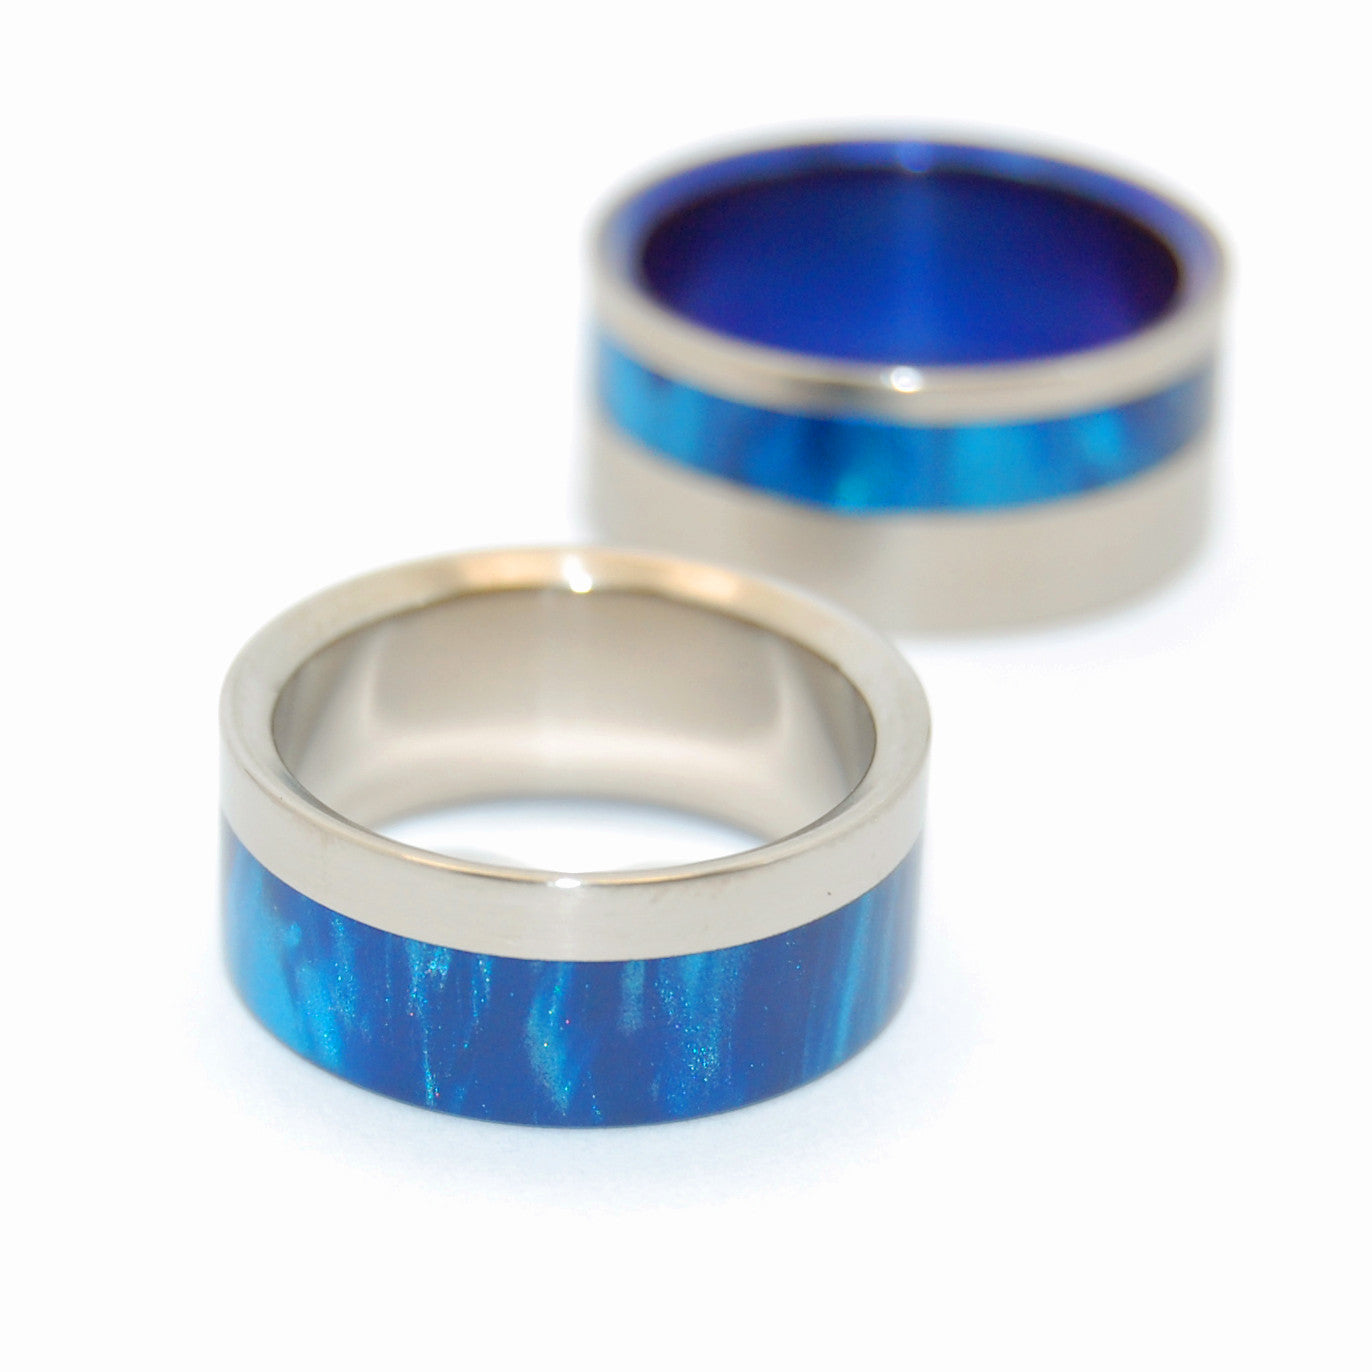 TO THE WINDS PROMISE | Blue Marbled Resin & Titanium - Unique Wedding Rings - Wedding Rings Set - Minter and Richter Designs